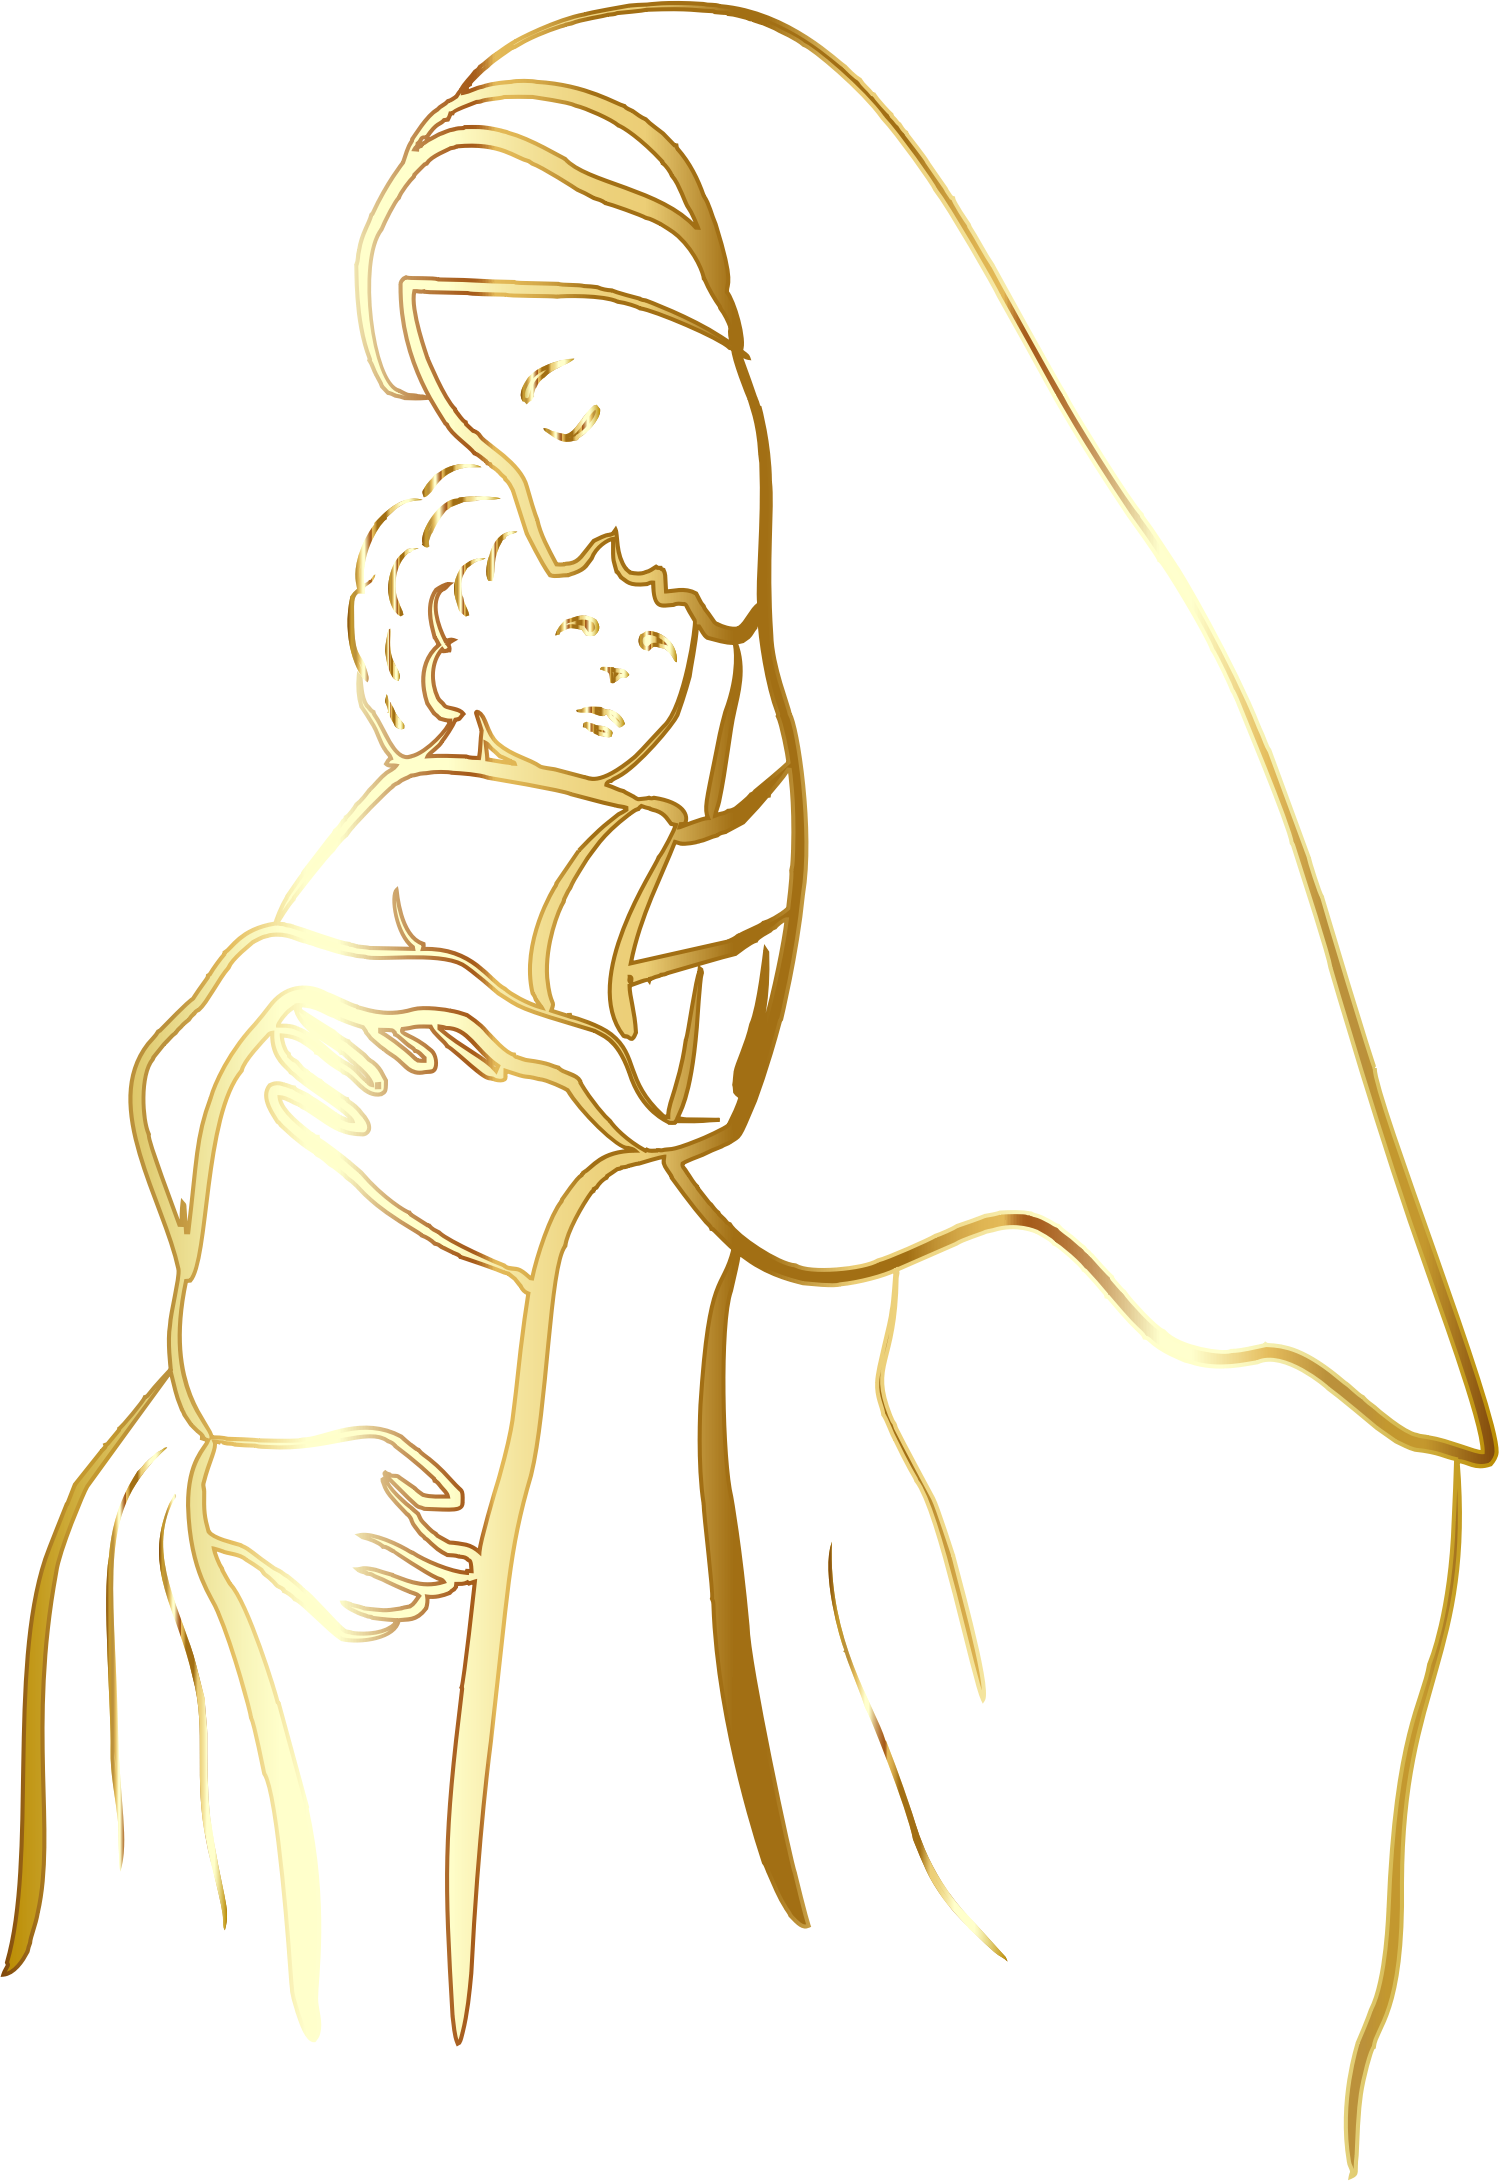 Baby Jesus PNG Background Image